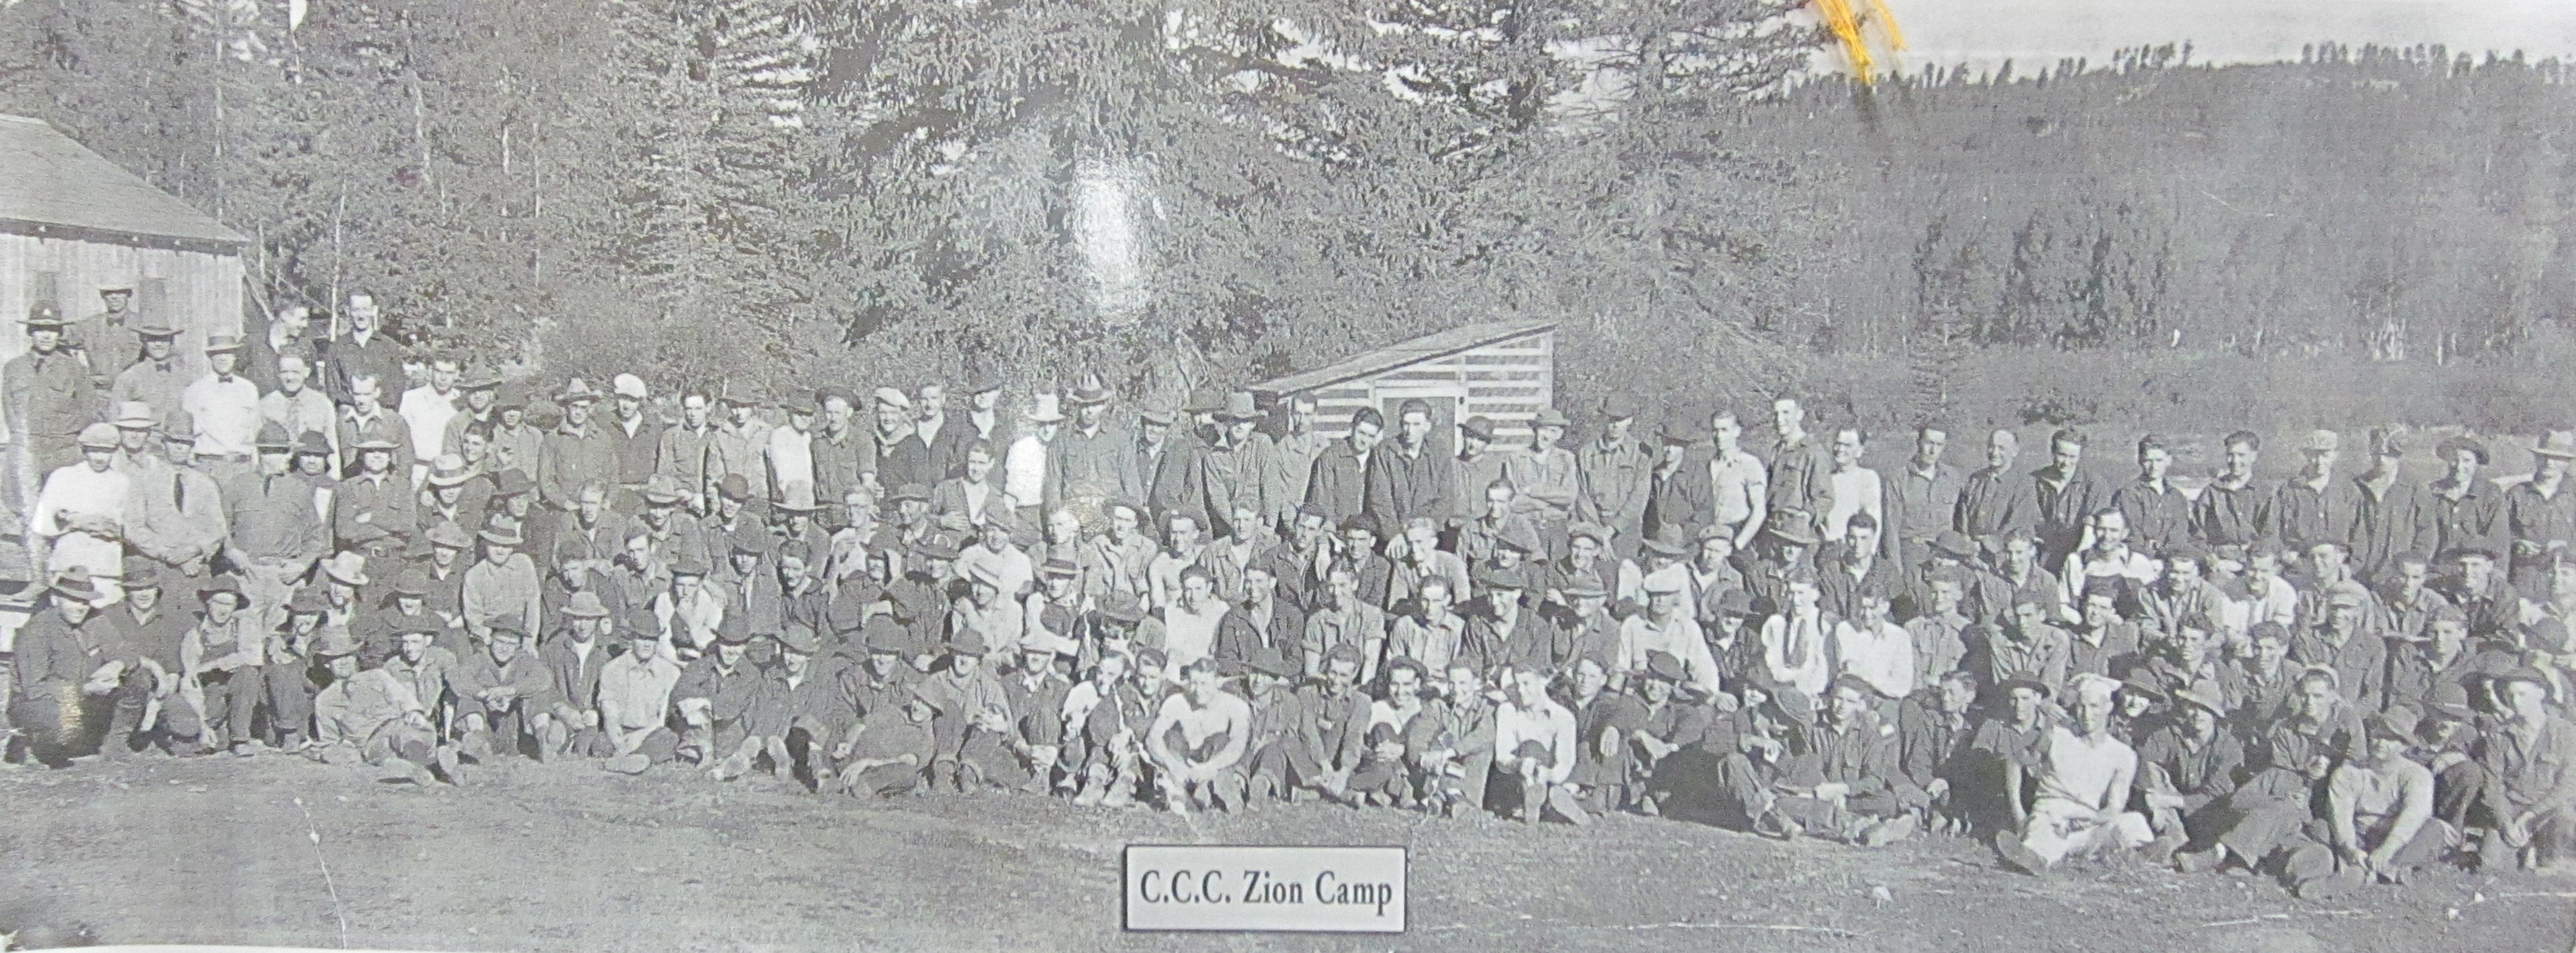 Photo of the men of the Zion CCC Camp